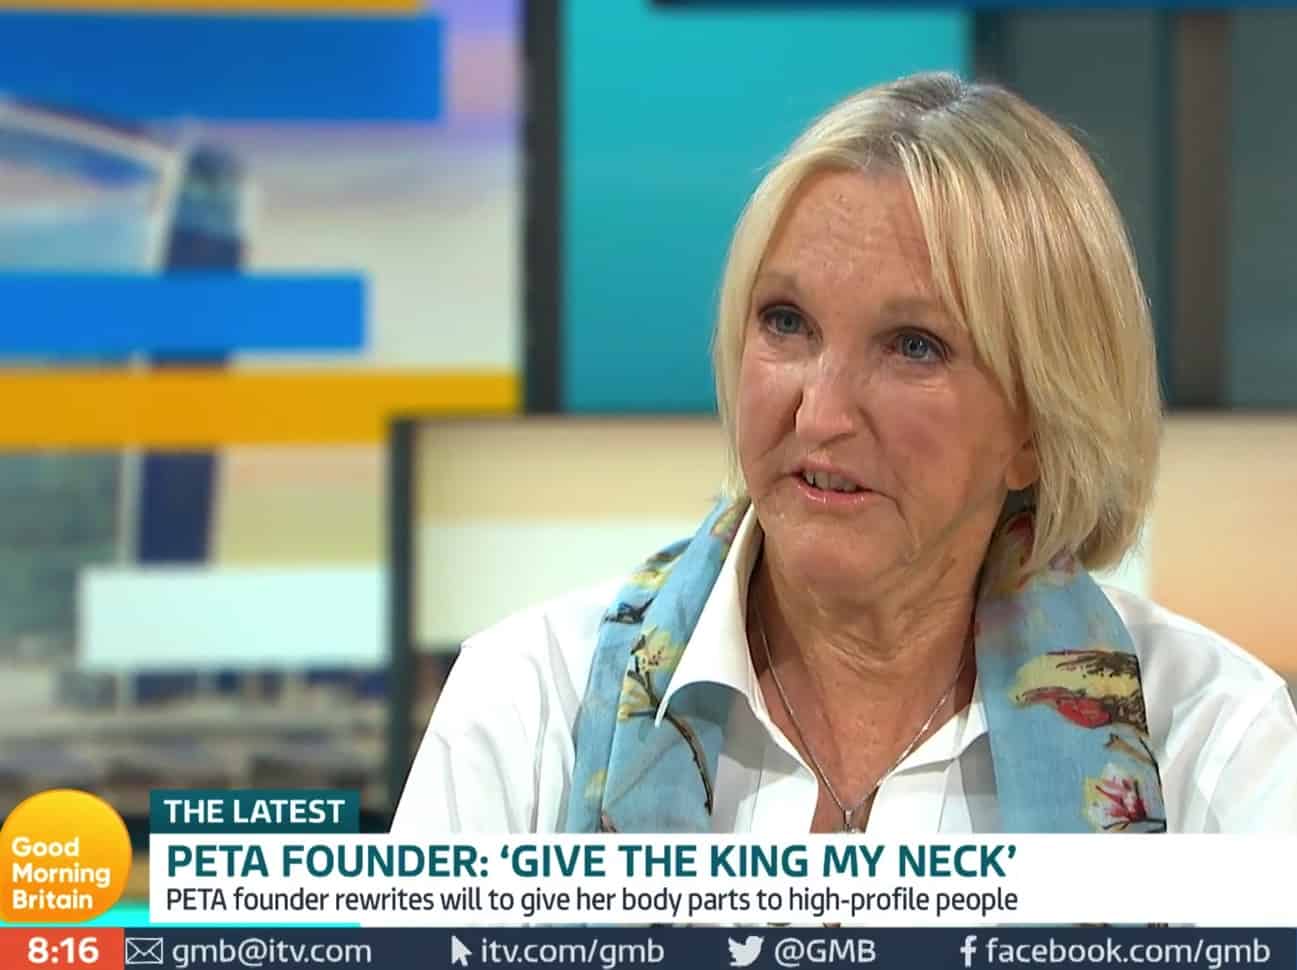 Peta founder requests that a piece of her neck is sent to the King when she dies